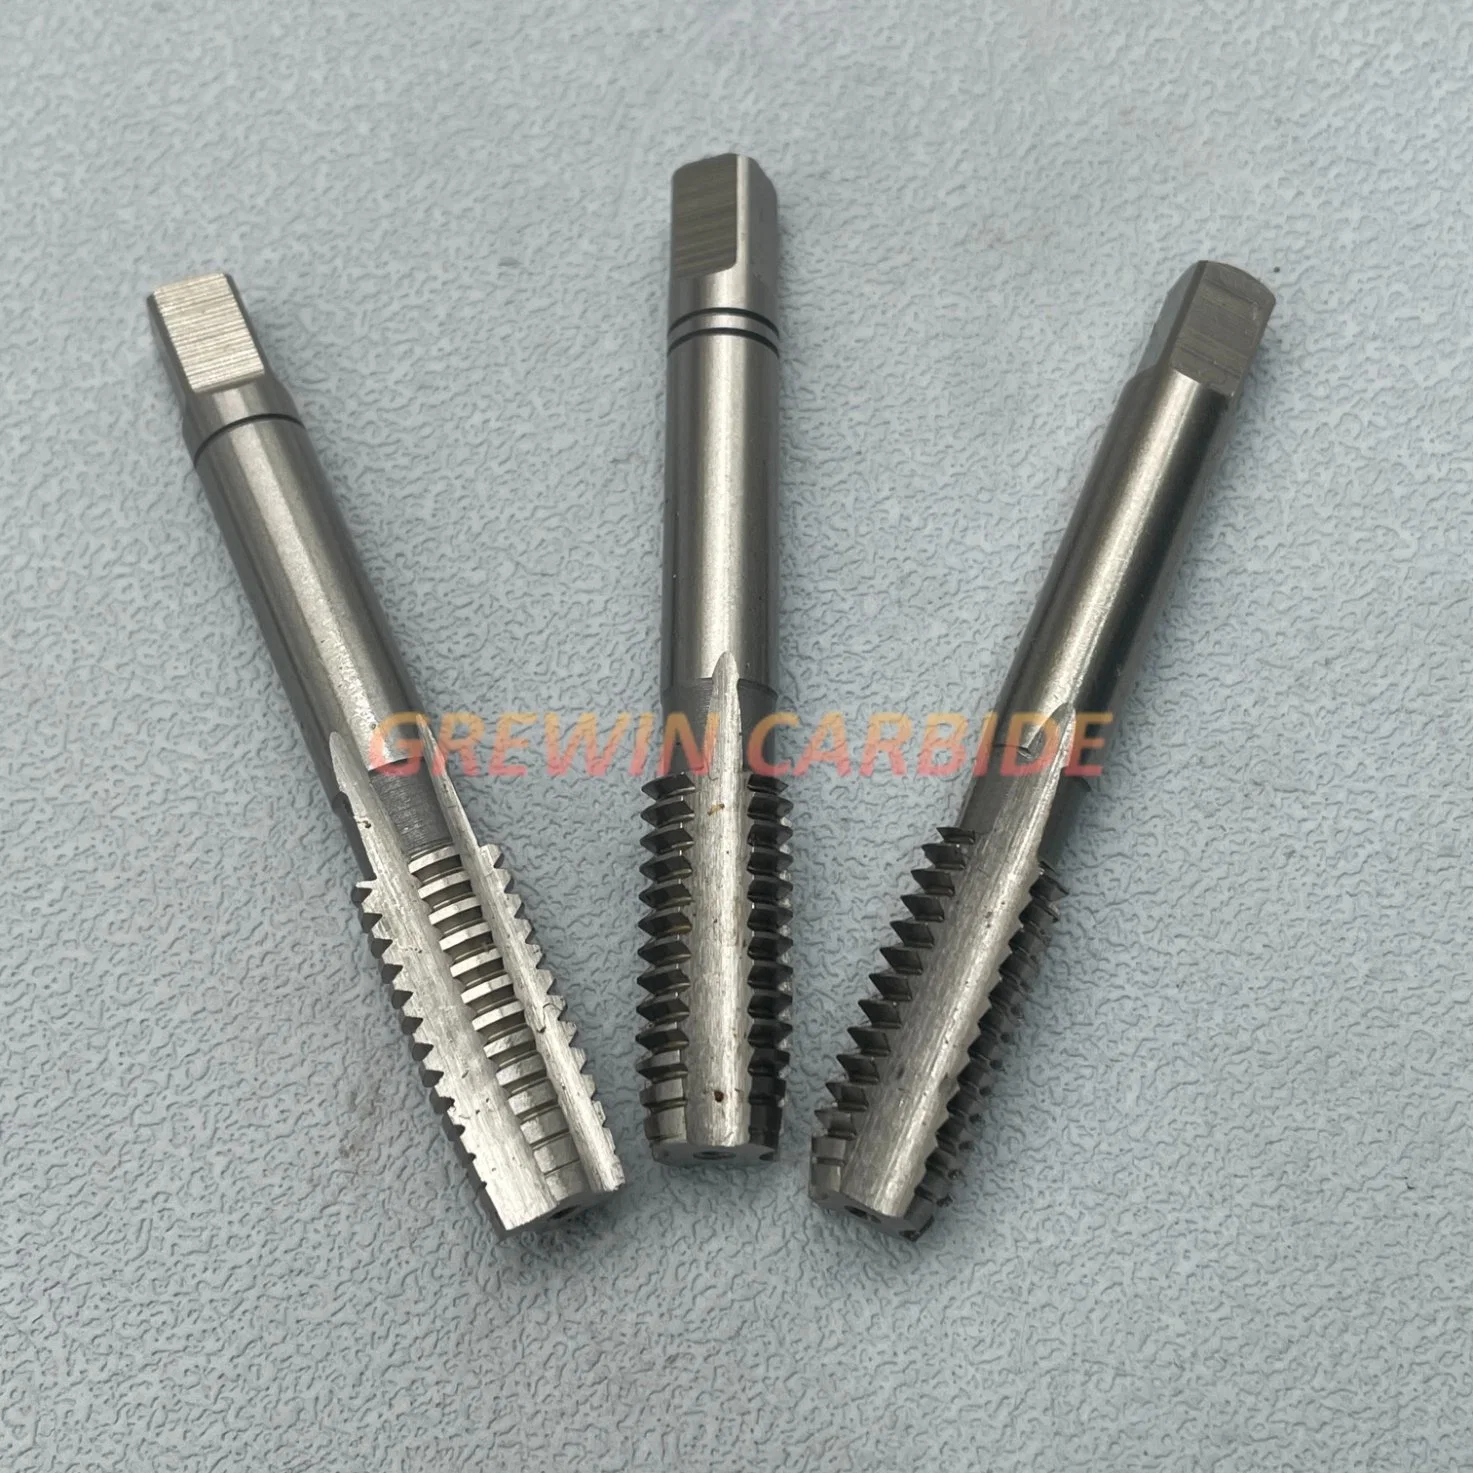 Grewin-Wholesale/Supplier HSS M2 DIN352 Hand Taps Inch Size 7/16'' Bsw Straight Fluted 3 Pieces a Set for Hand Threads Cutting Tools